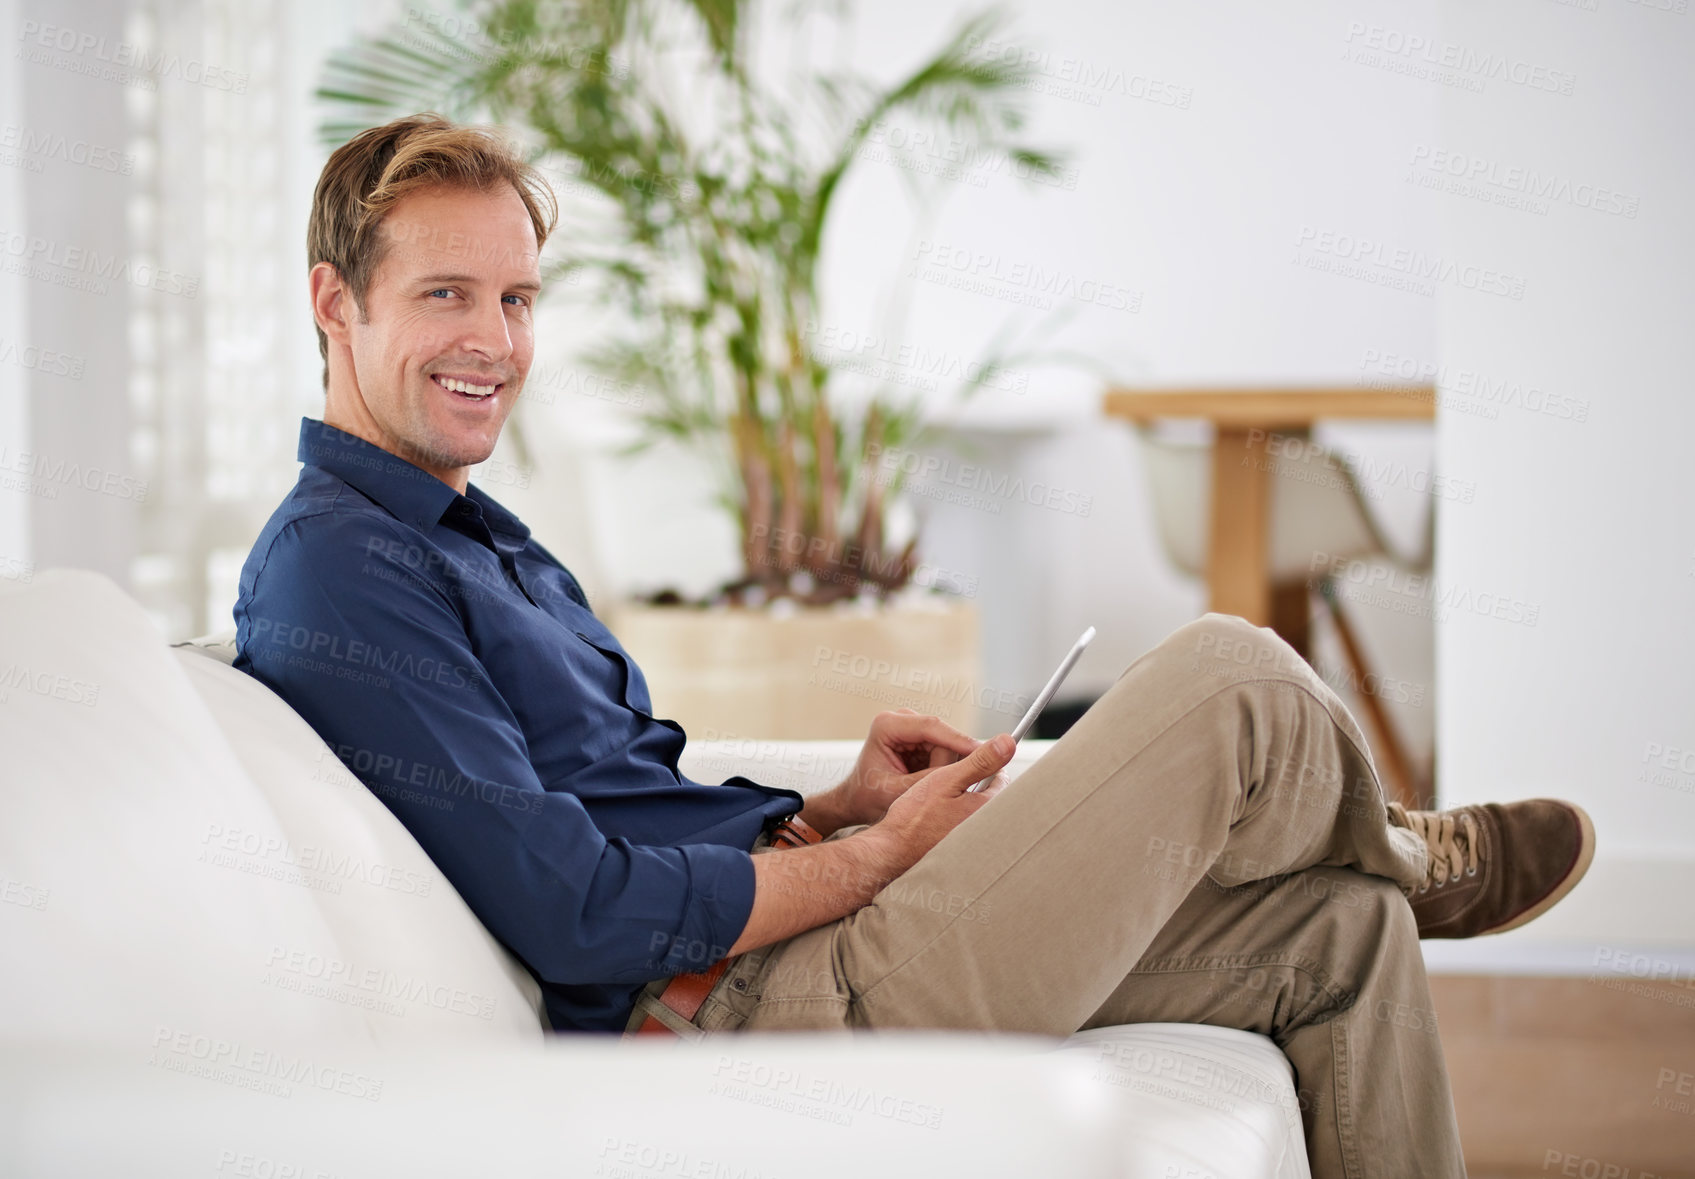 Buy stock photo Shot of a handsome man using his tablet while sitting on the sofa at home